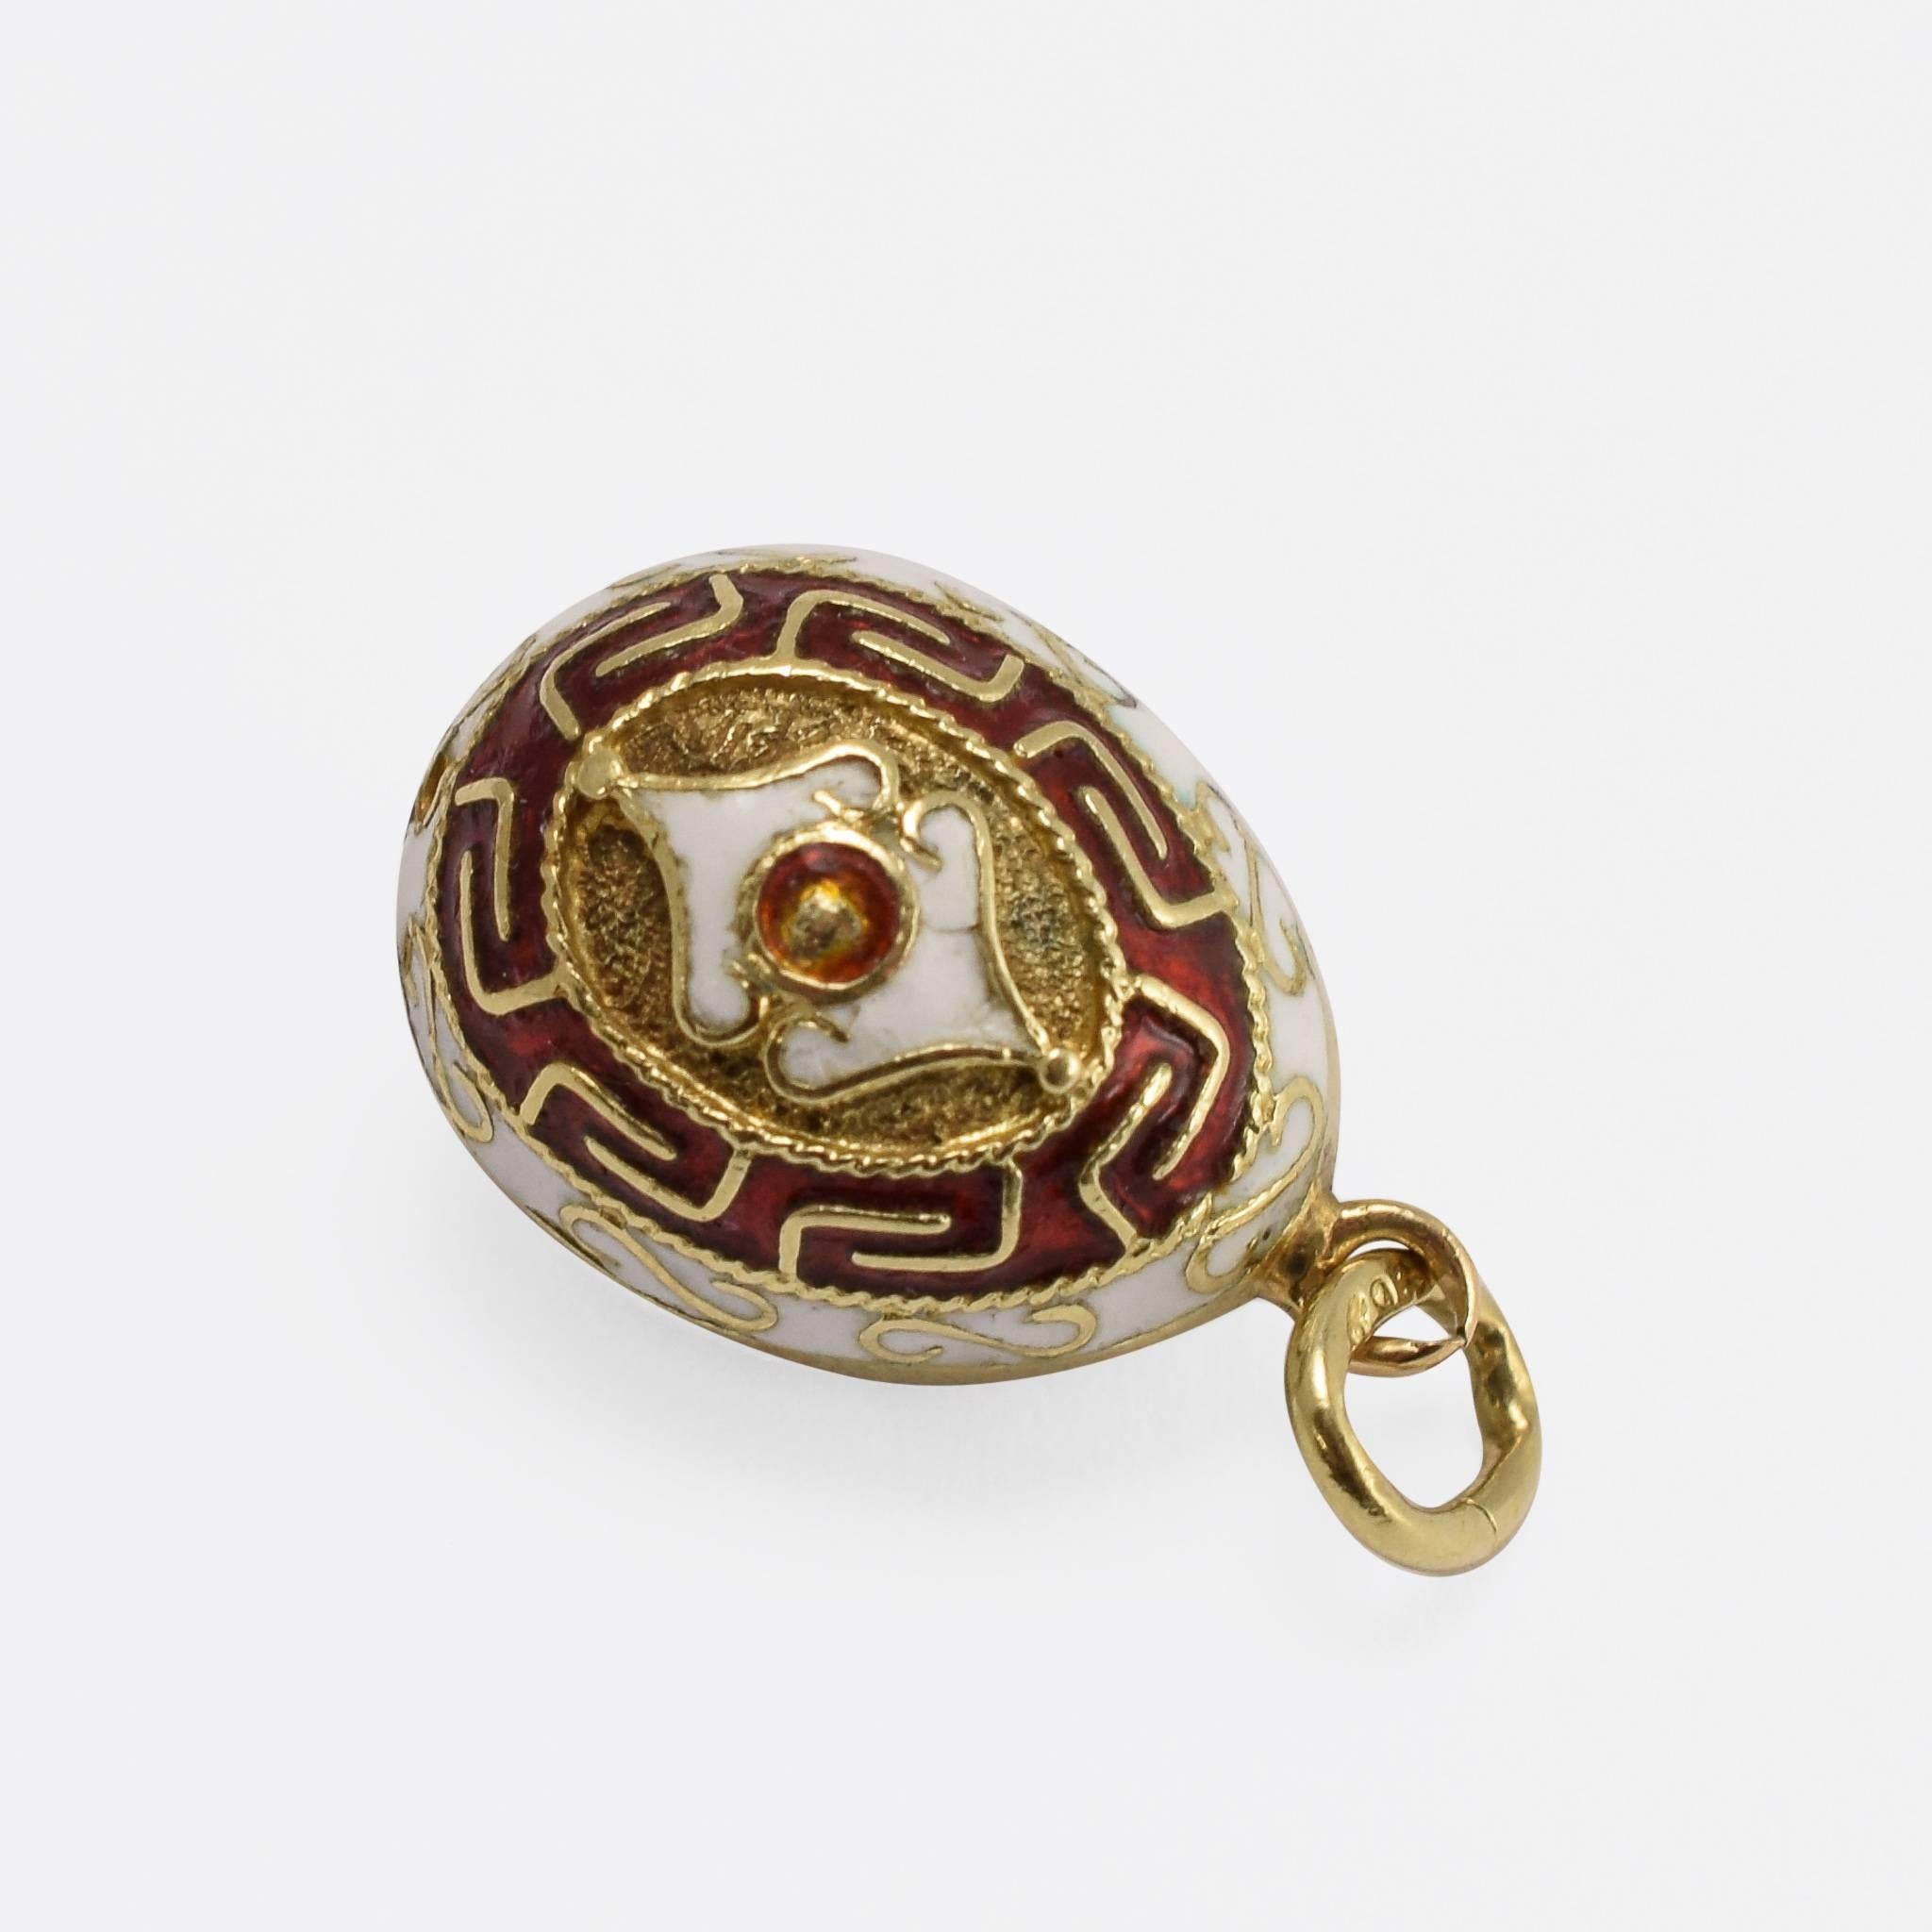 This charming Russian miniature egg pendant dates to the late 1930s. Finished in fine enamel, the designs include swirls, ropework and labyrinth-style embellishment - all in a beautiful crimson and white. An wonderful example of stunning Russian